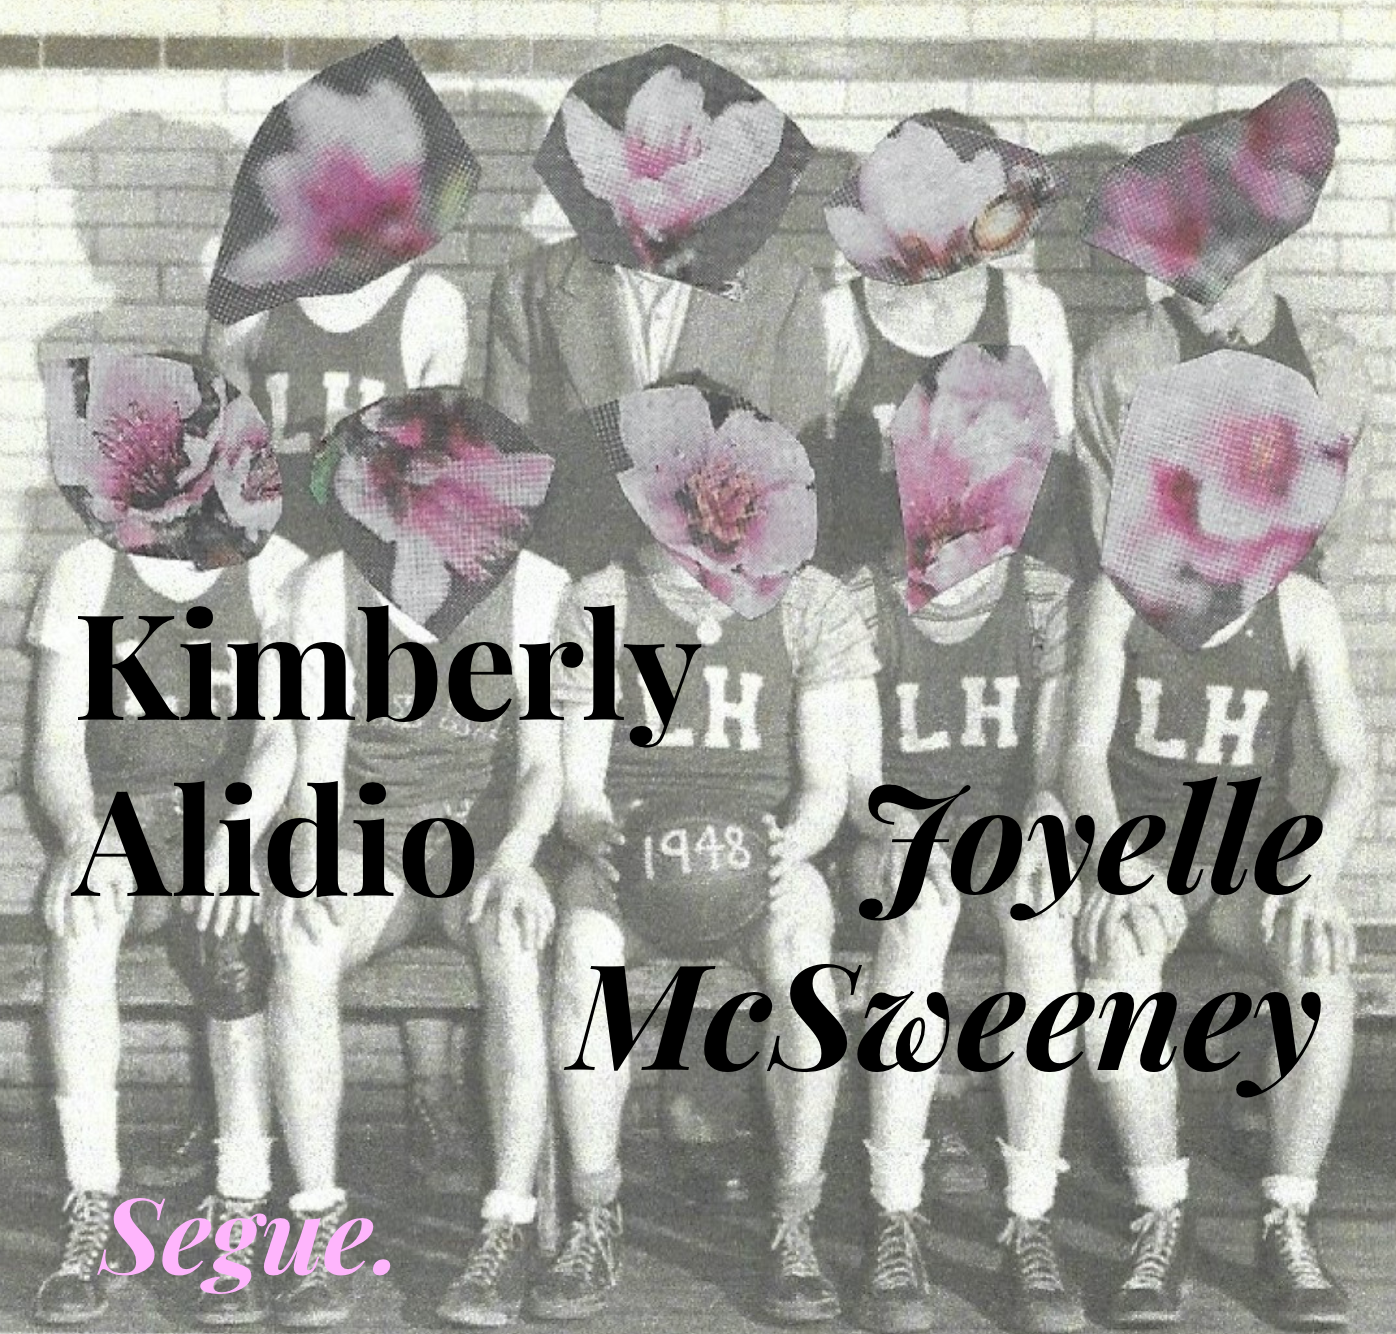  Flyer for Segue Reading Series featuring Kimberly Alidio and Joyelle McSweeney. Artists Space. Artist: Keith Higginbotham. 